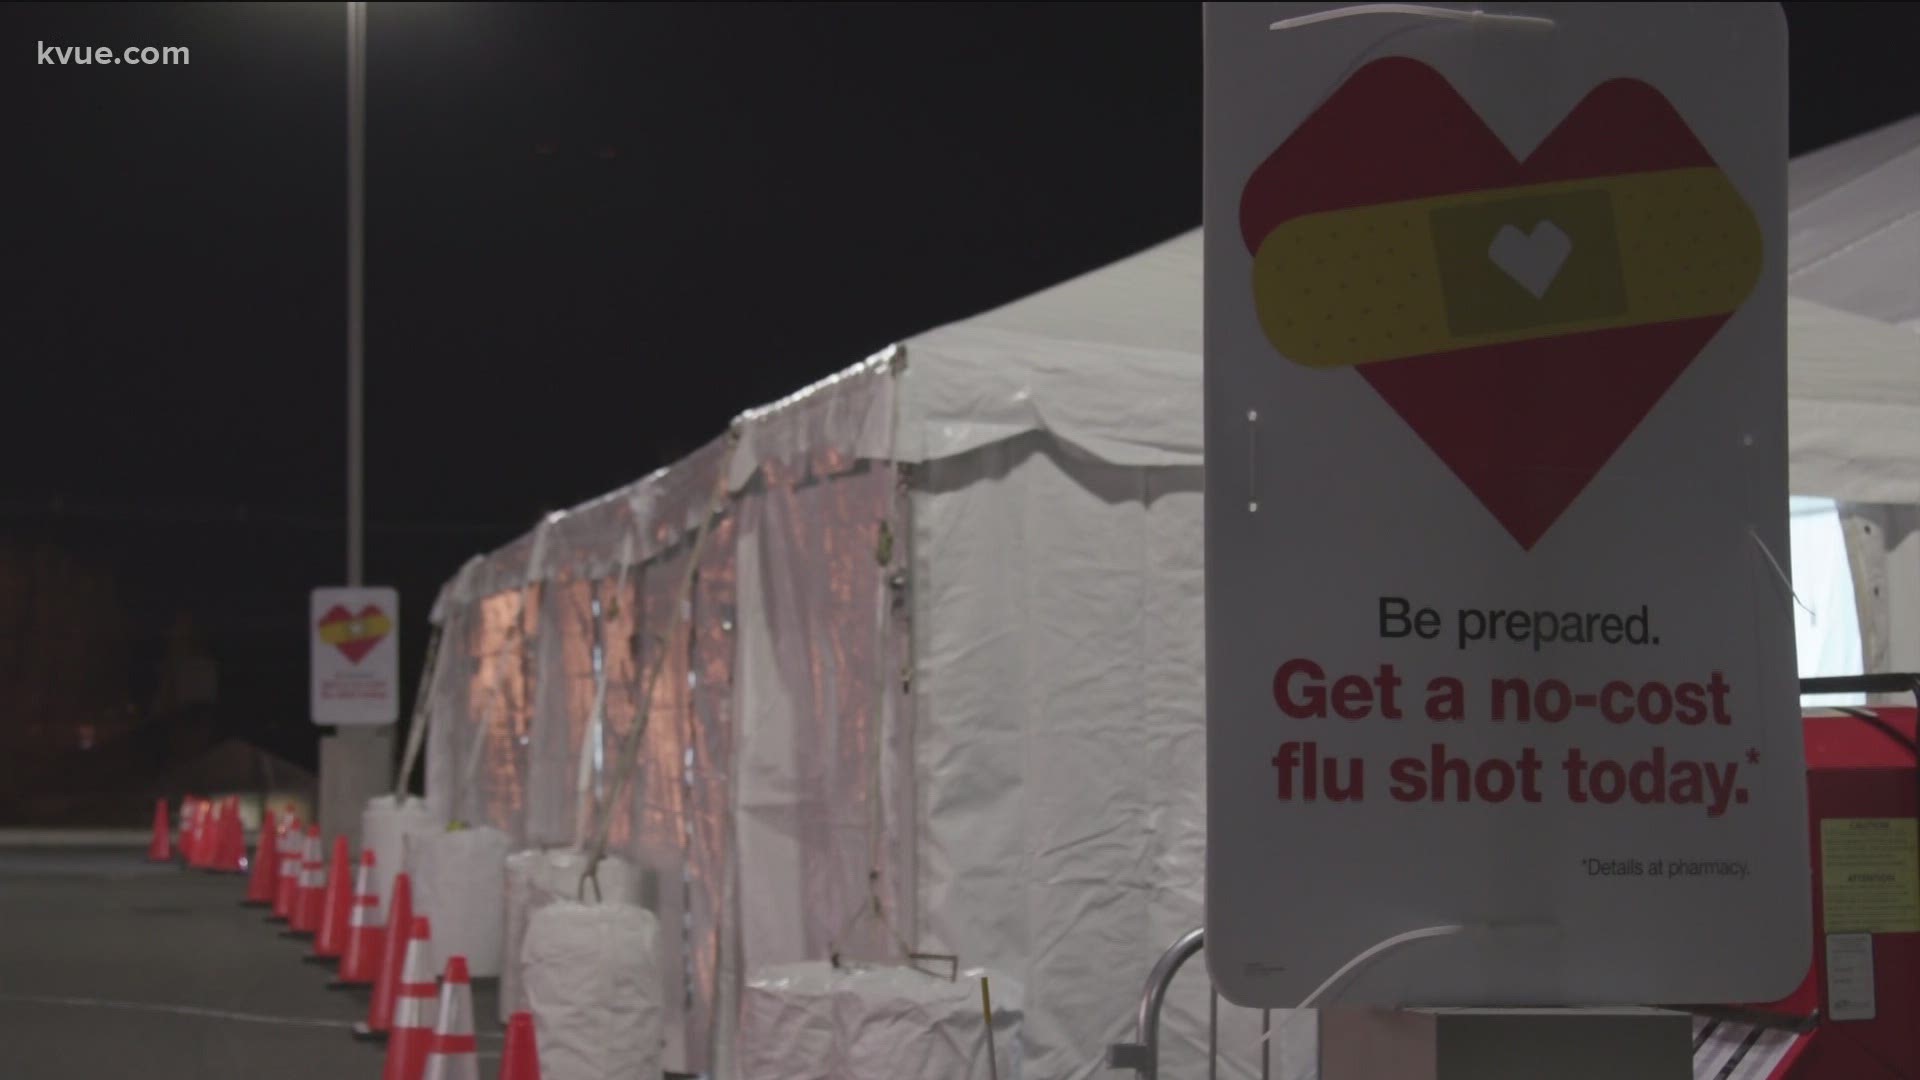 CVS is reminding Central Texans to get flu shots now.